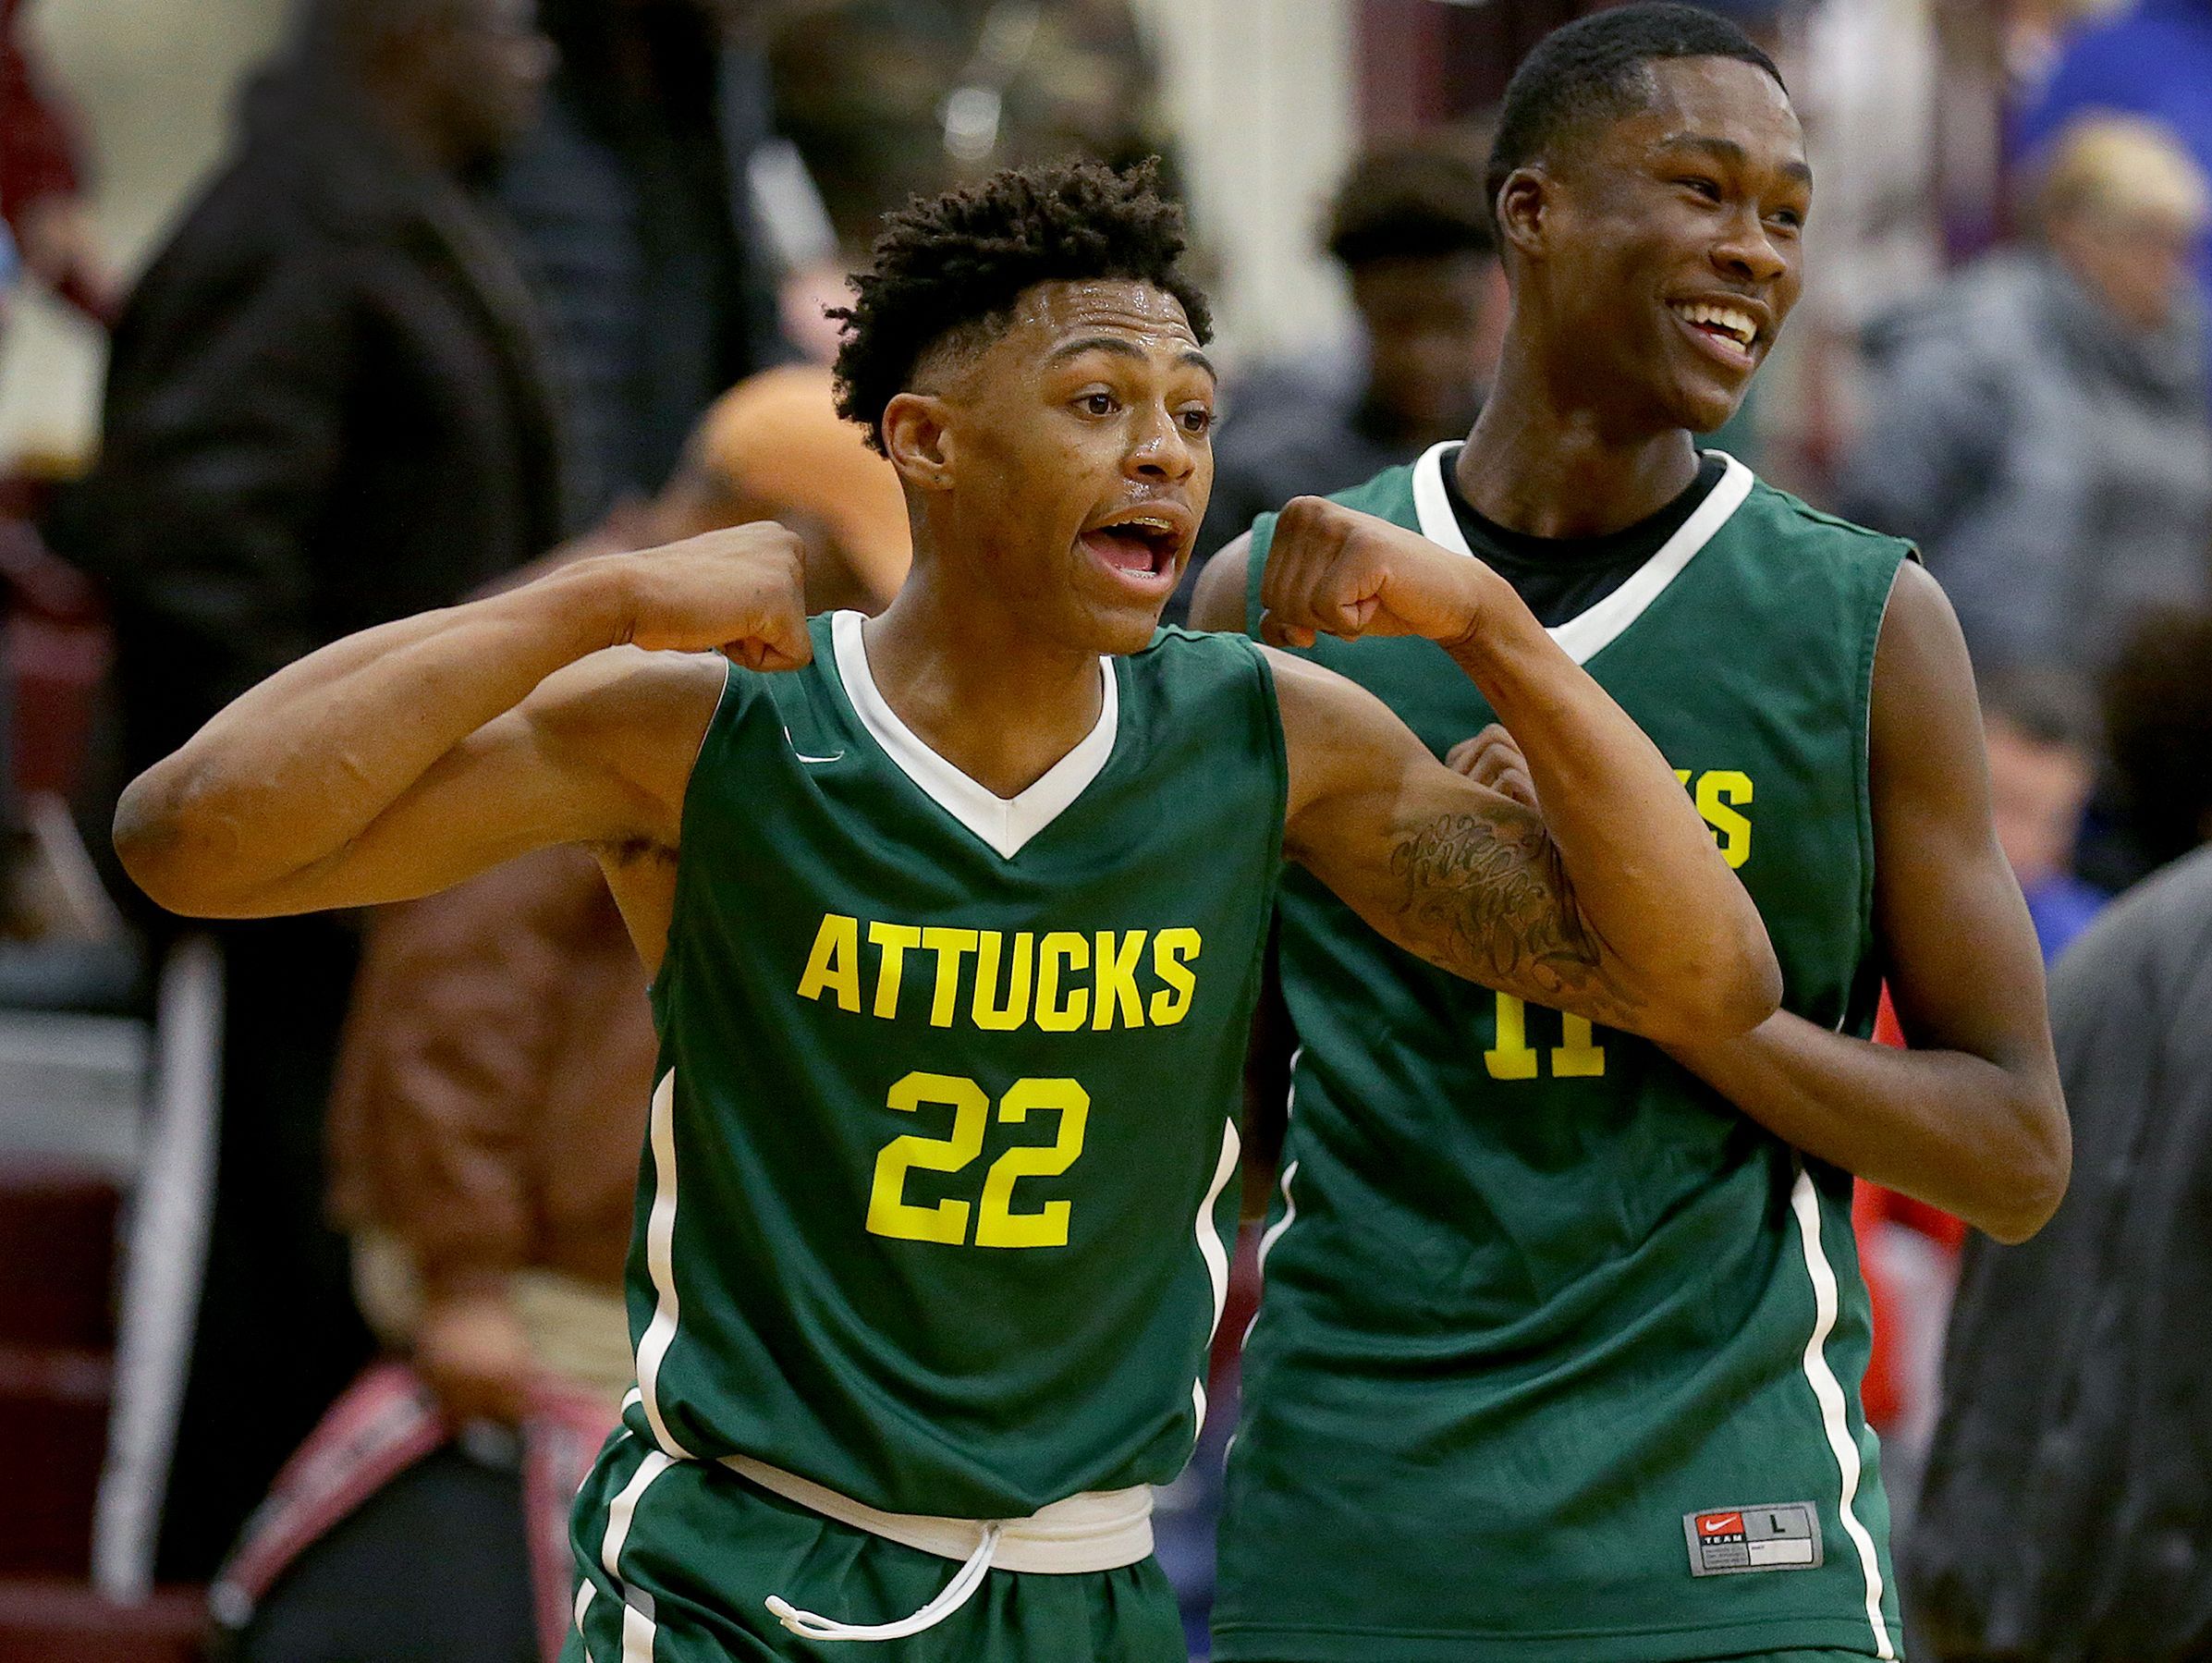 Crispus Attucks Tigers Nike Sibande (22) and Derrick Briscoe (11) begin to celebrate their win in their IHSAA 3A Sectional basketball game Friday, March 3, 2017, evening at Brebeuf Jesuit Preparatory School. The Crispus Attucks Tigers defeated the Manual Redskins 65-53.